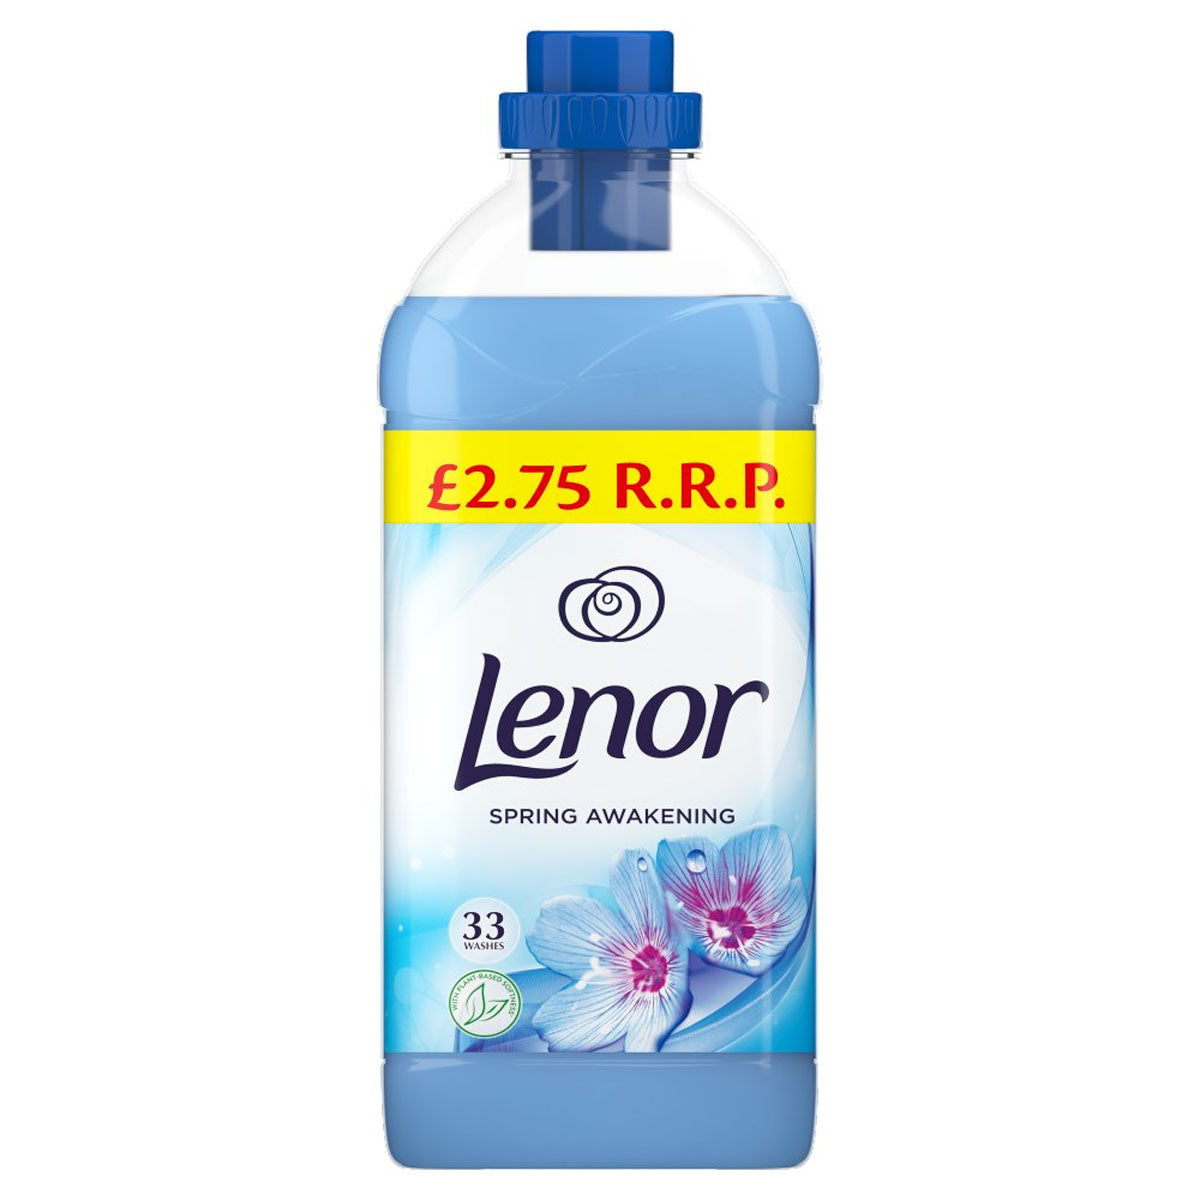 Lenor - Fabric Conditioner - 33 Washes - Continental Food Store